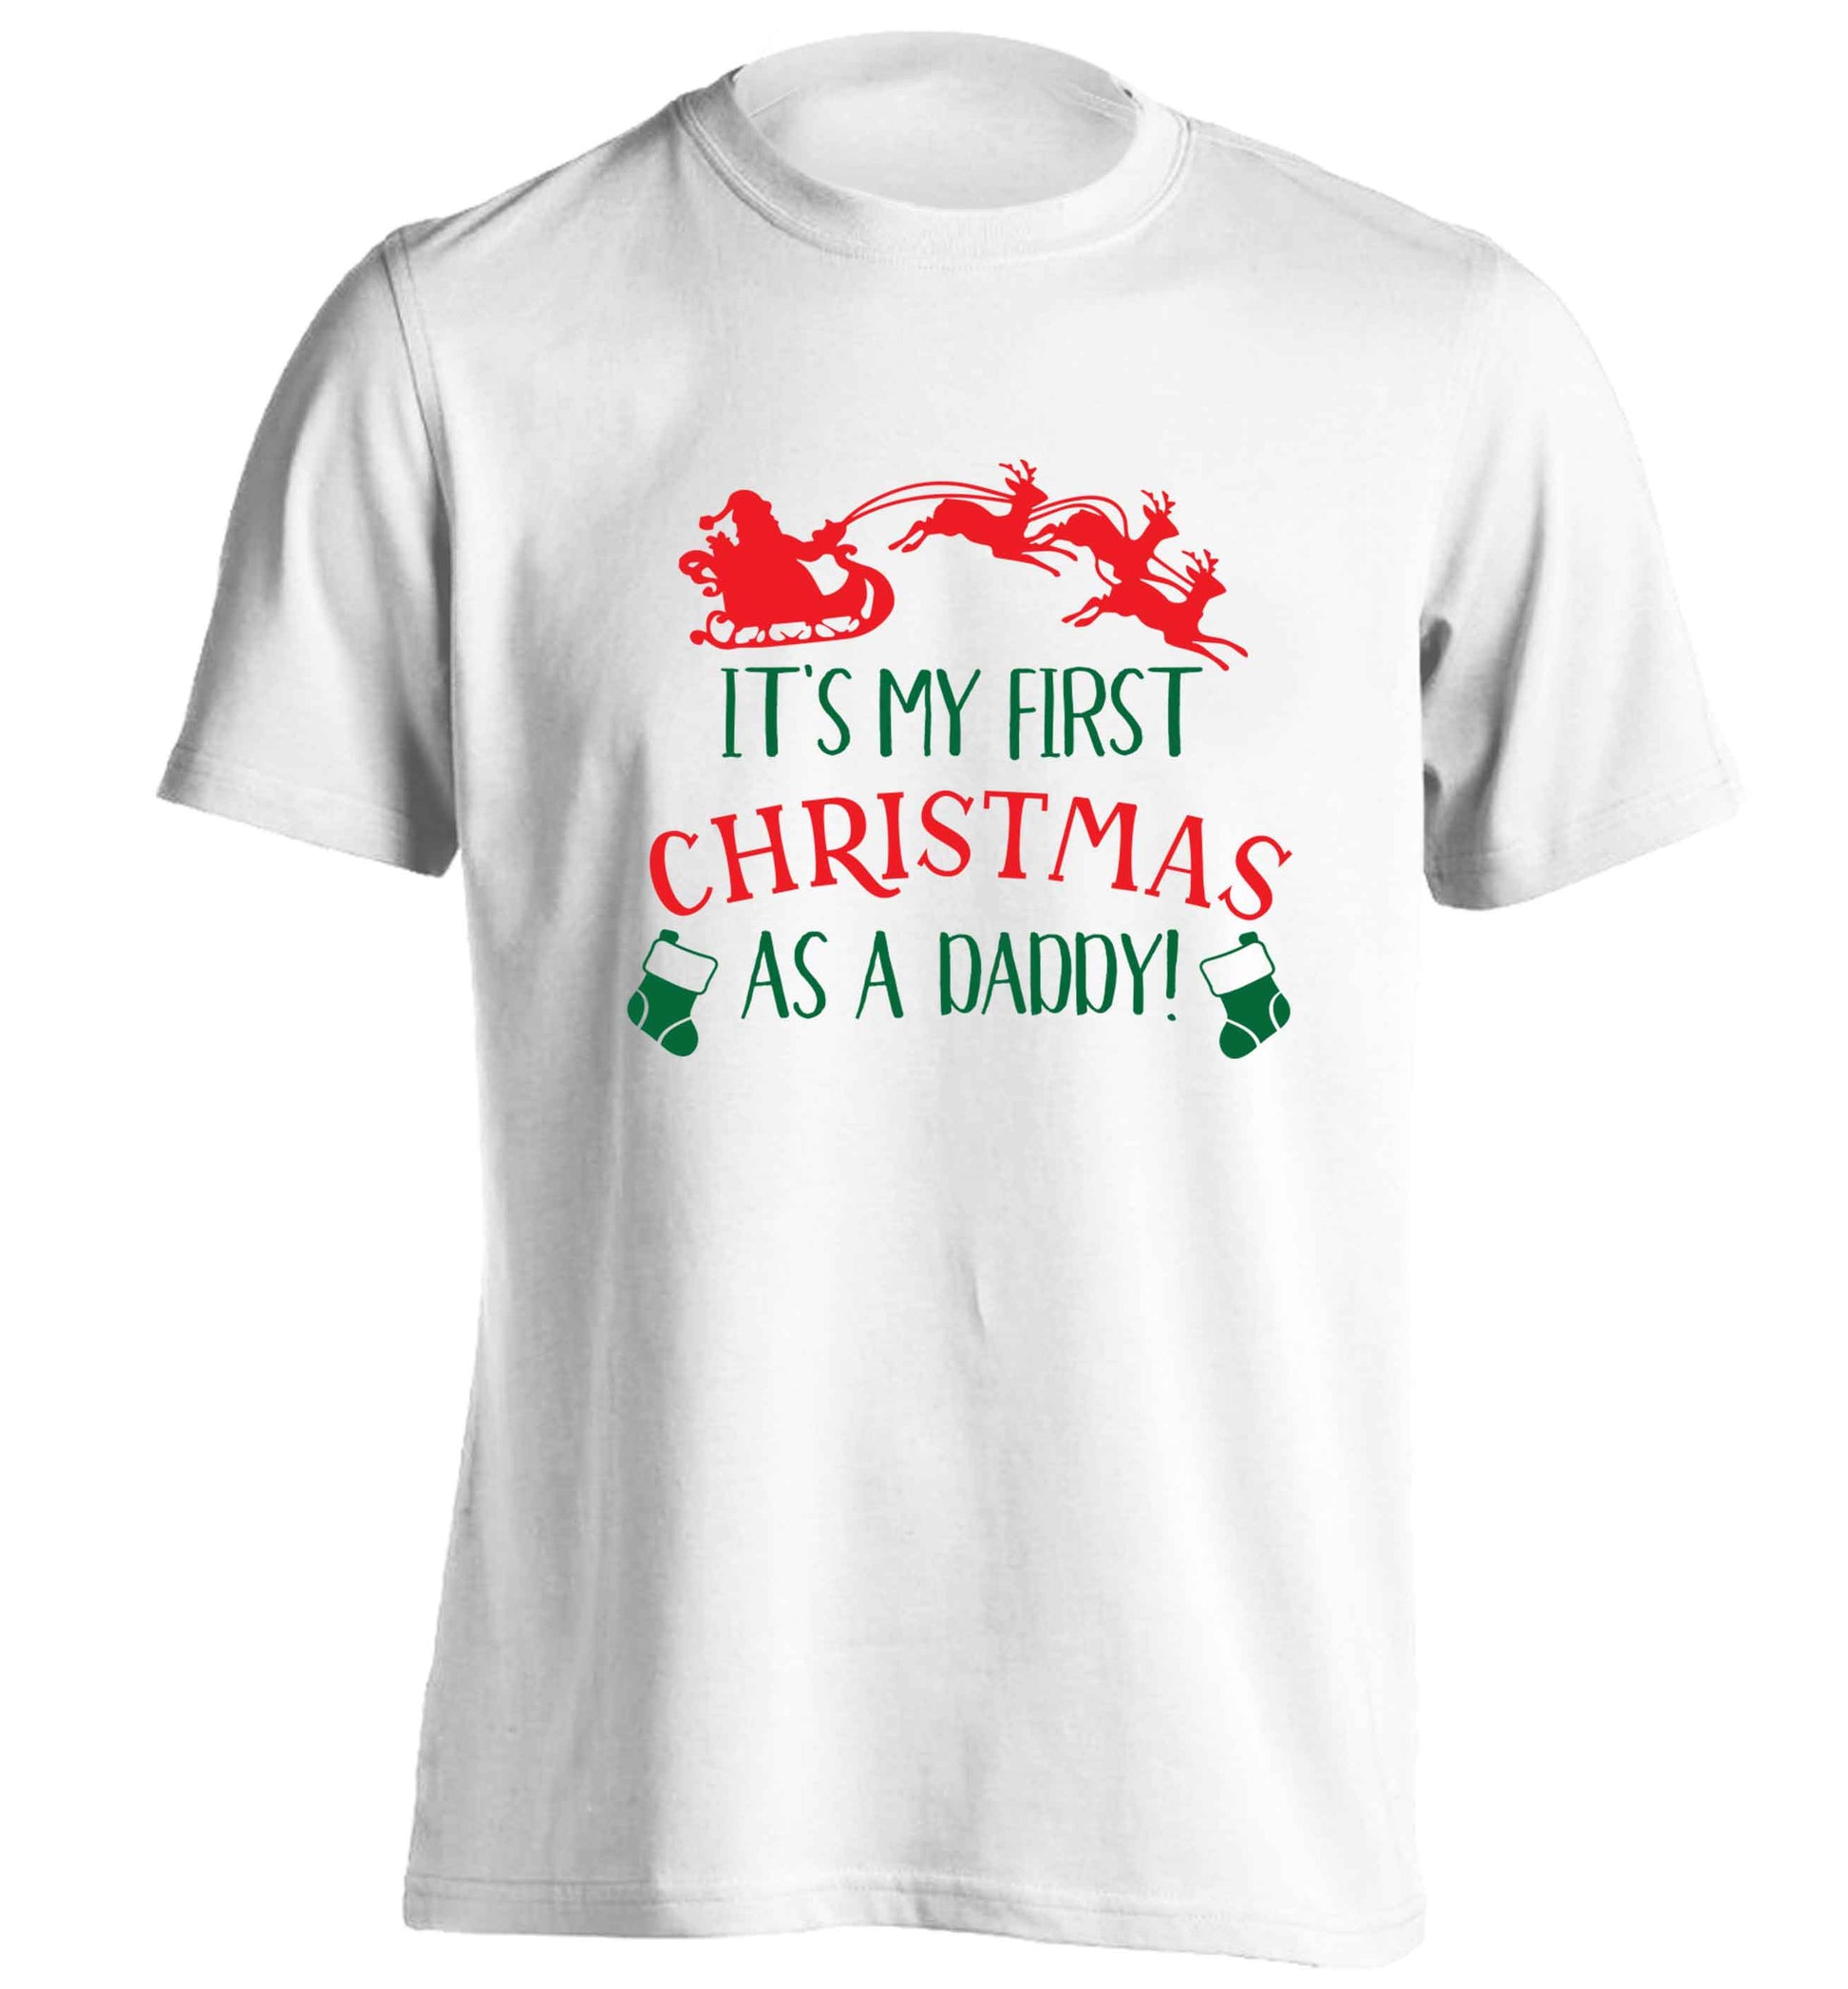 It's my first Christmas as a daddy adults unisex white Tshirt 2XL